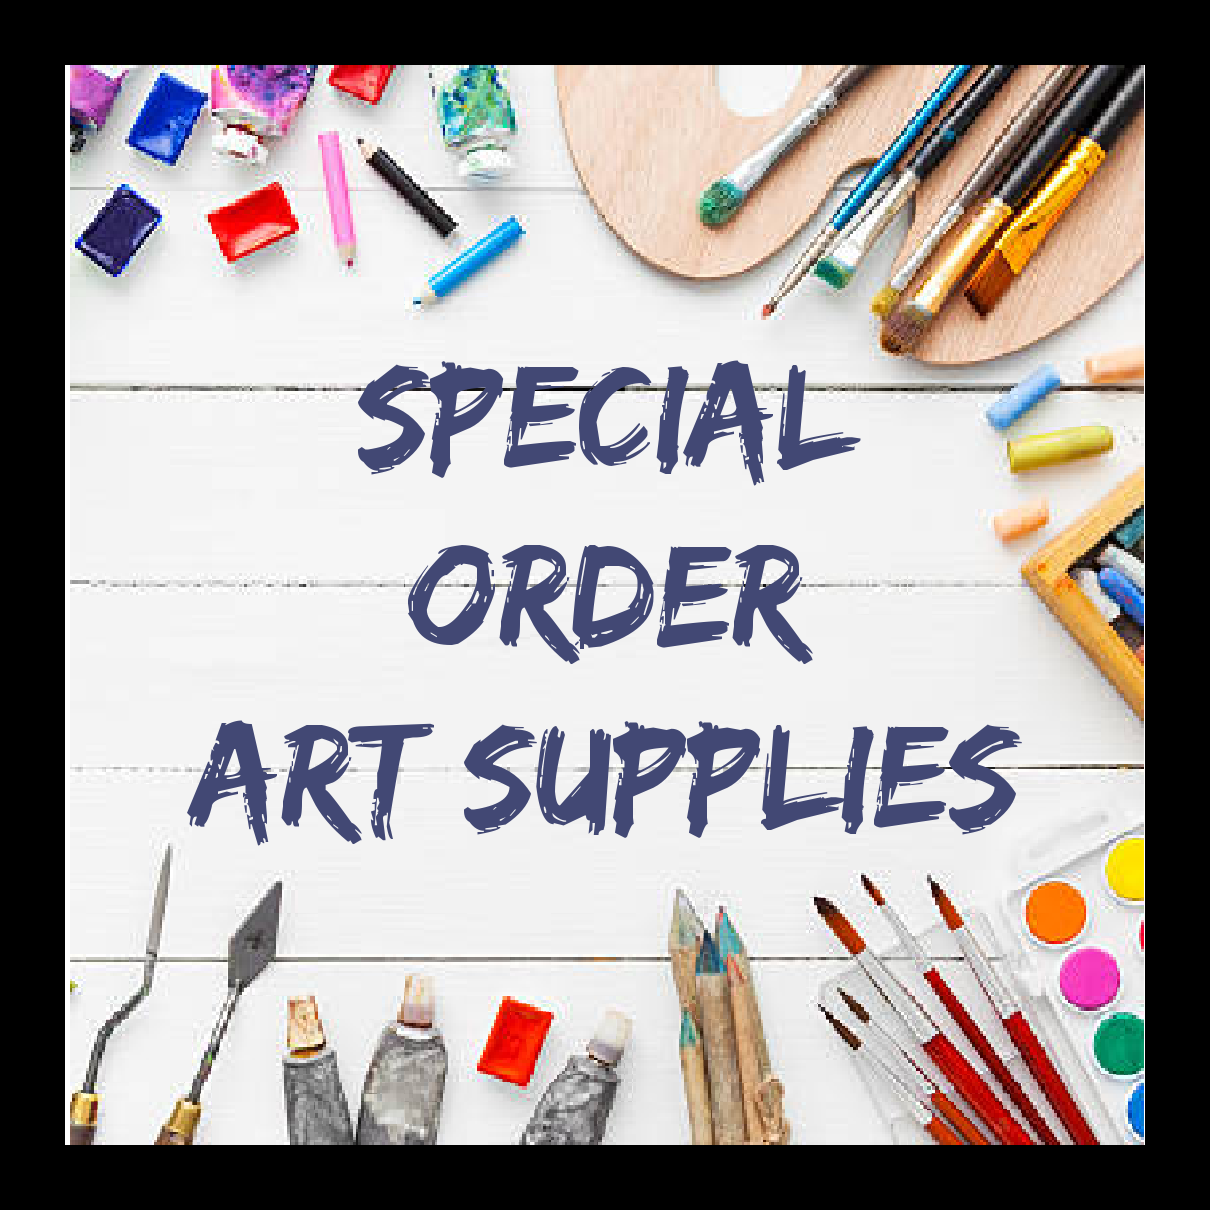 Best Art Supplies for Kids -Making Art Frugal - The Kitchen Table